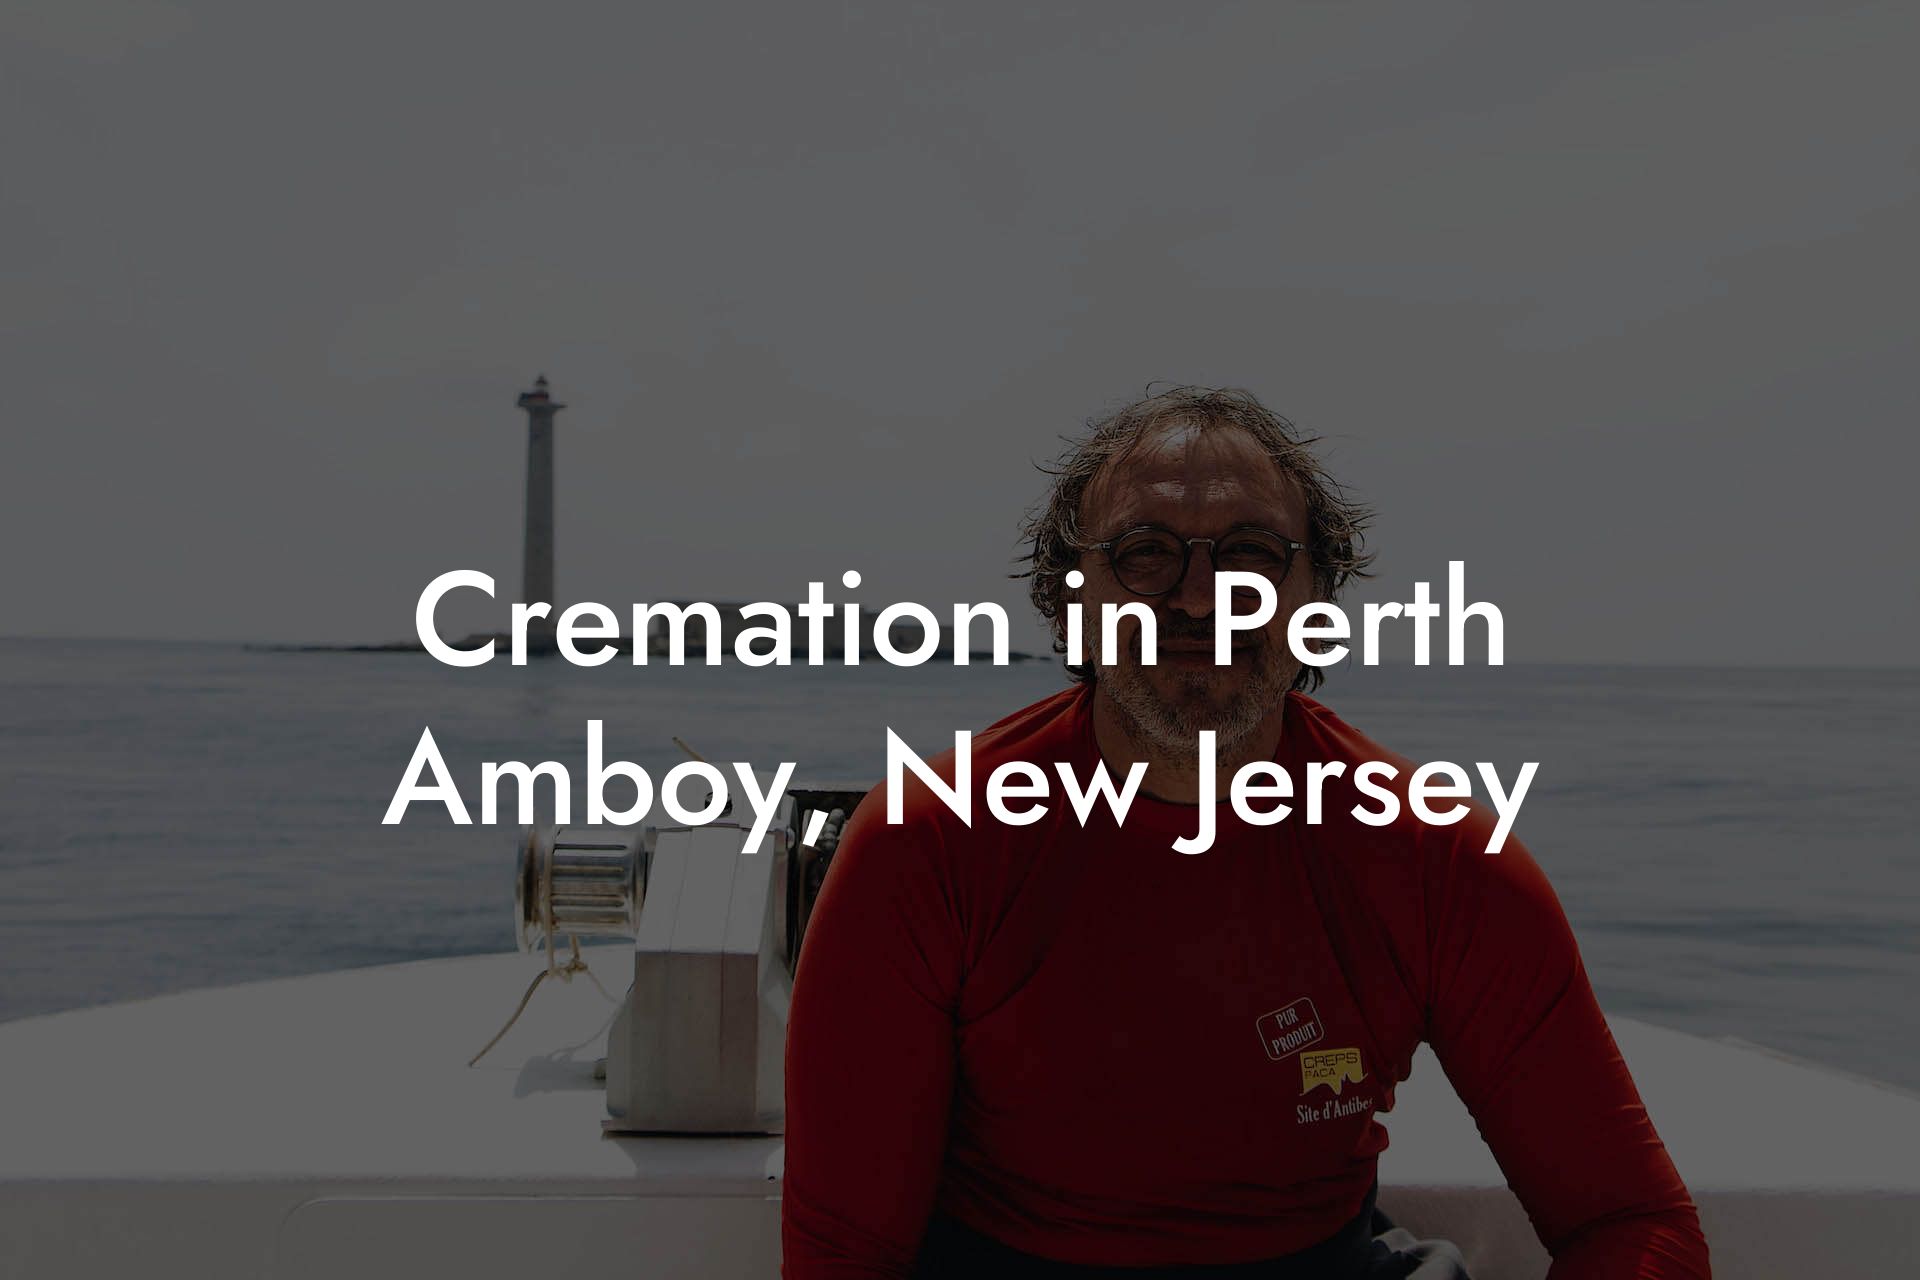 Cremation in Perth Amboy, New Jersey